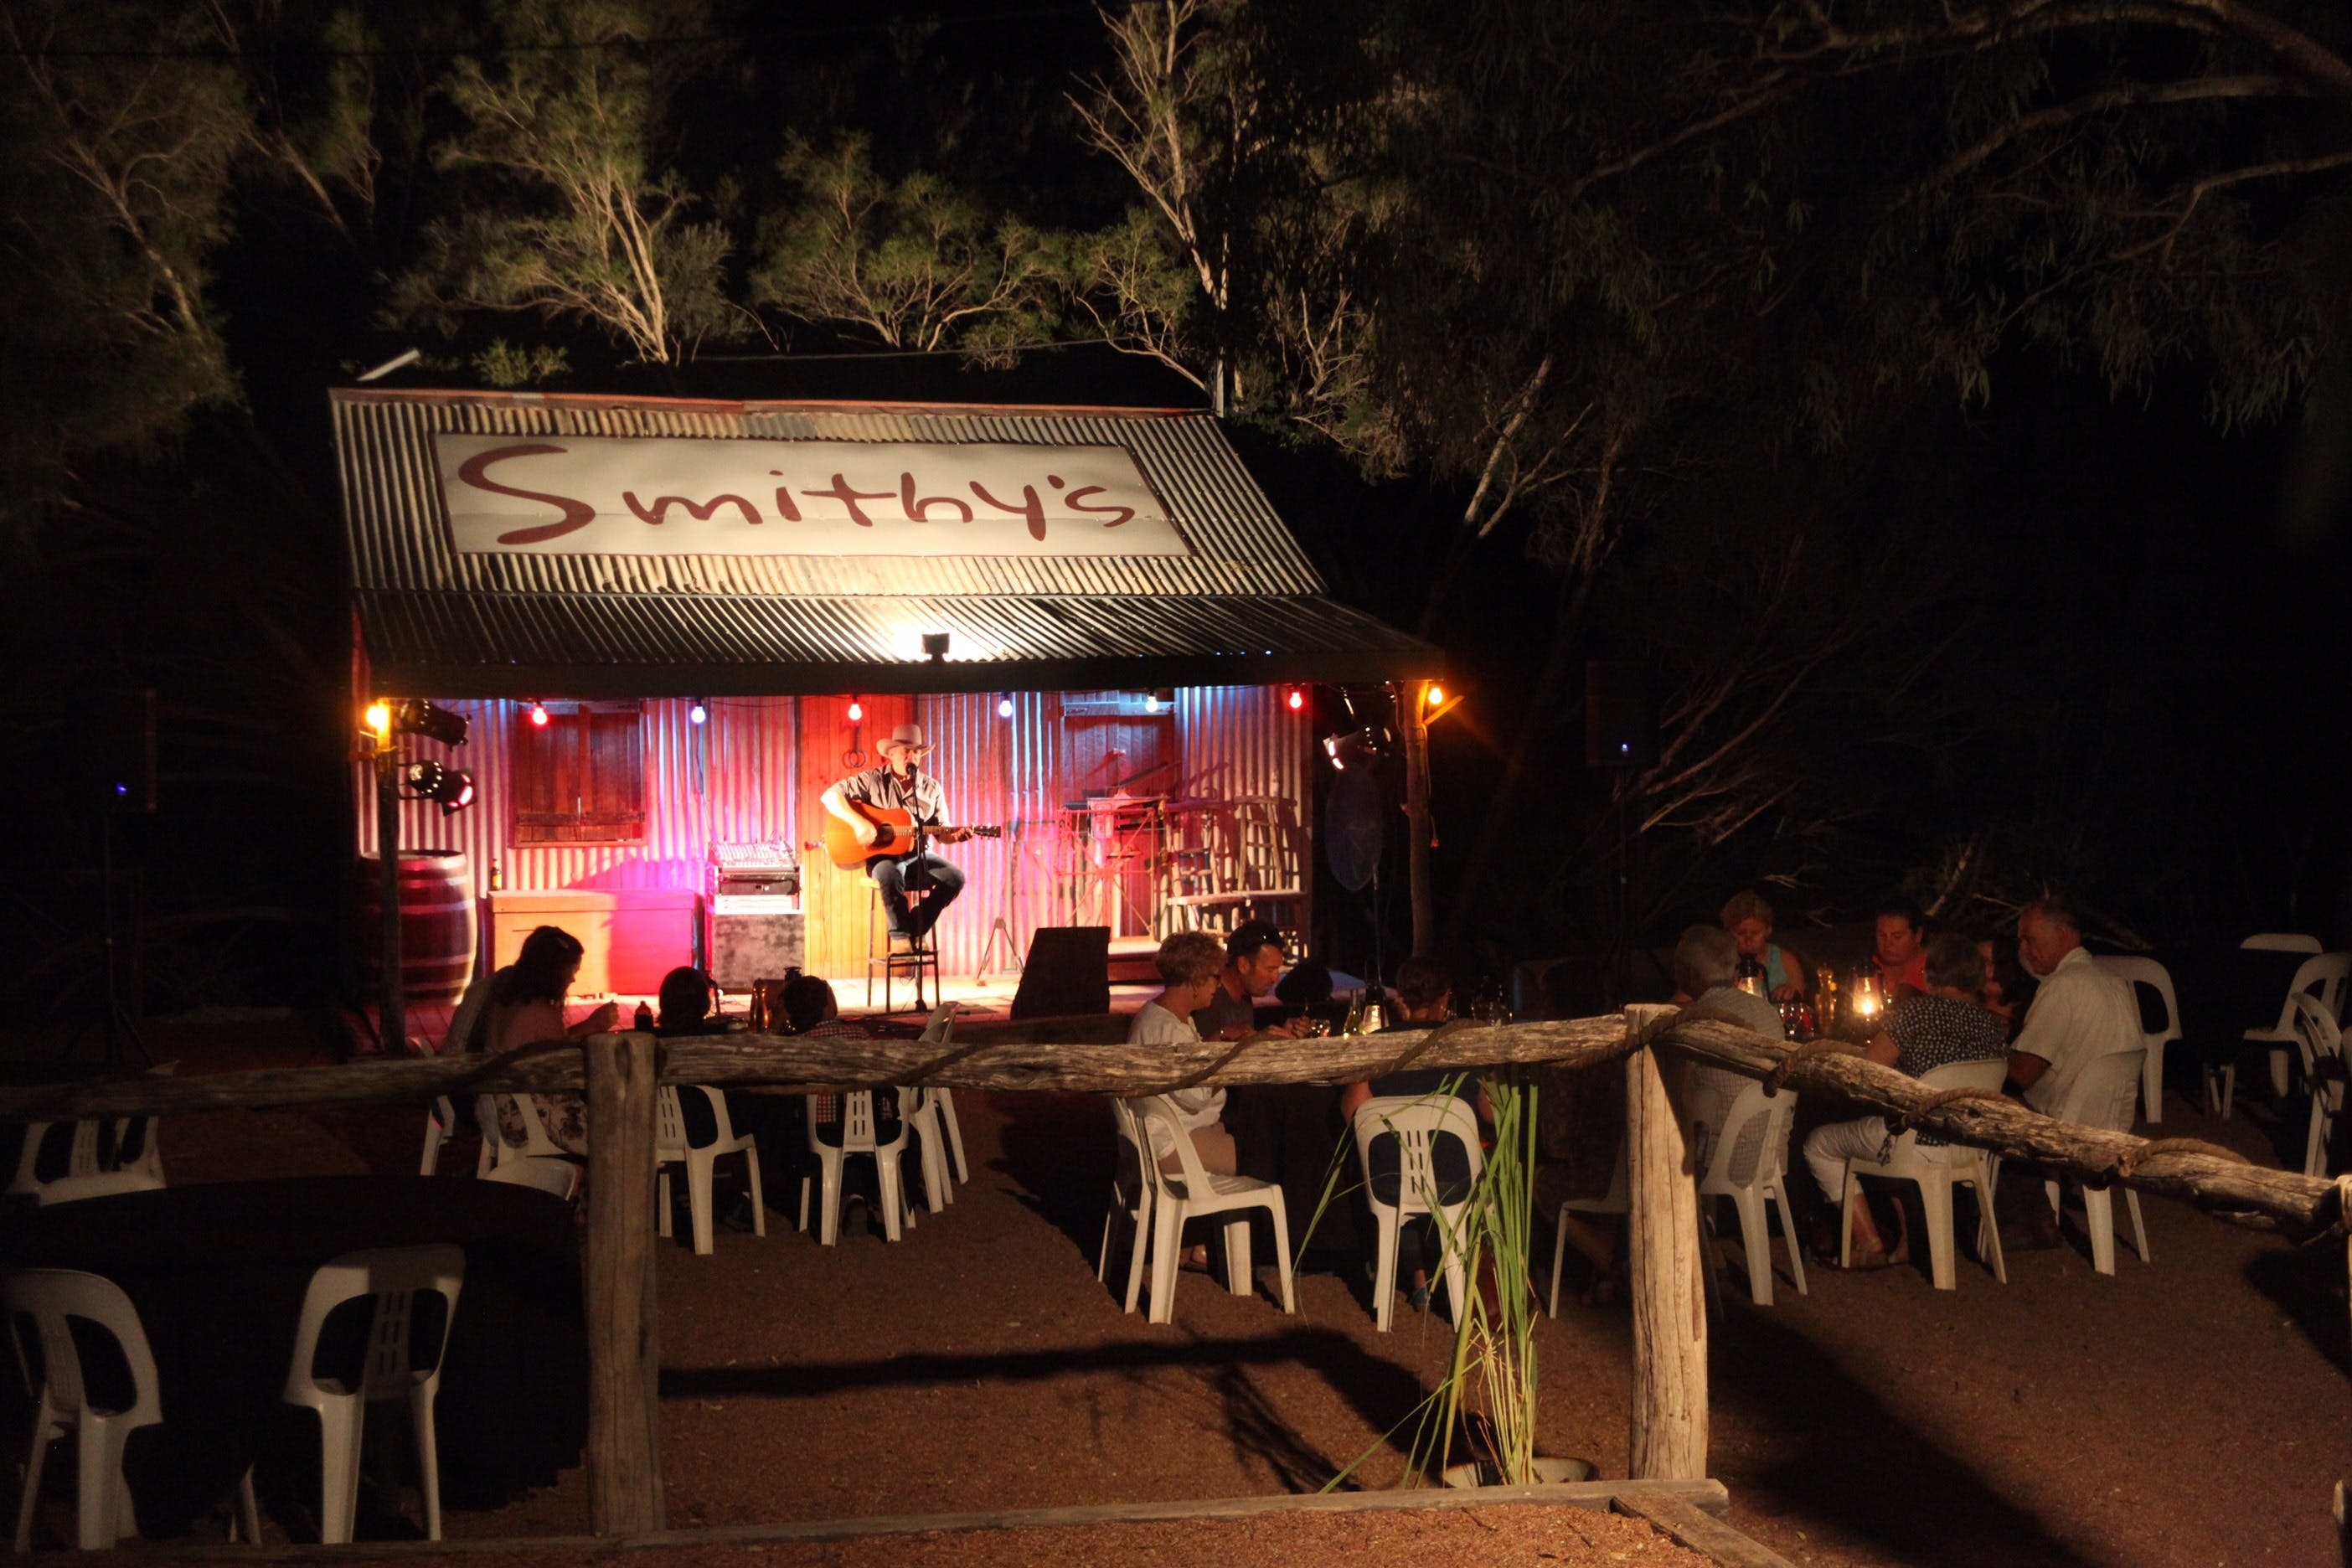 Smithy's Outback Dinner and Show - Accommodation Mt Buller